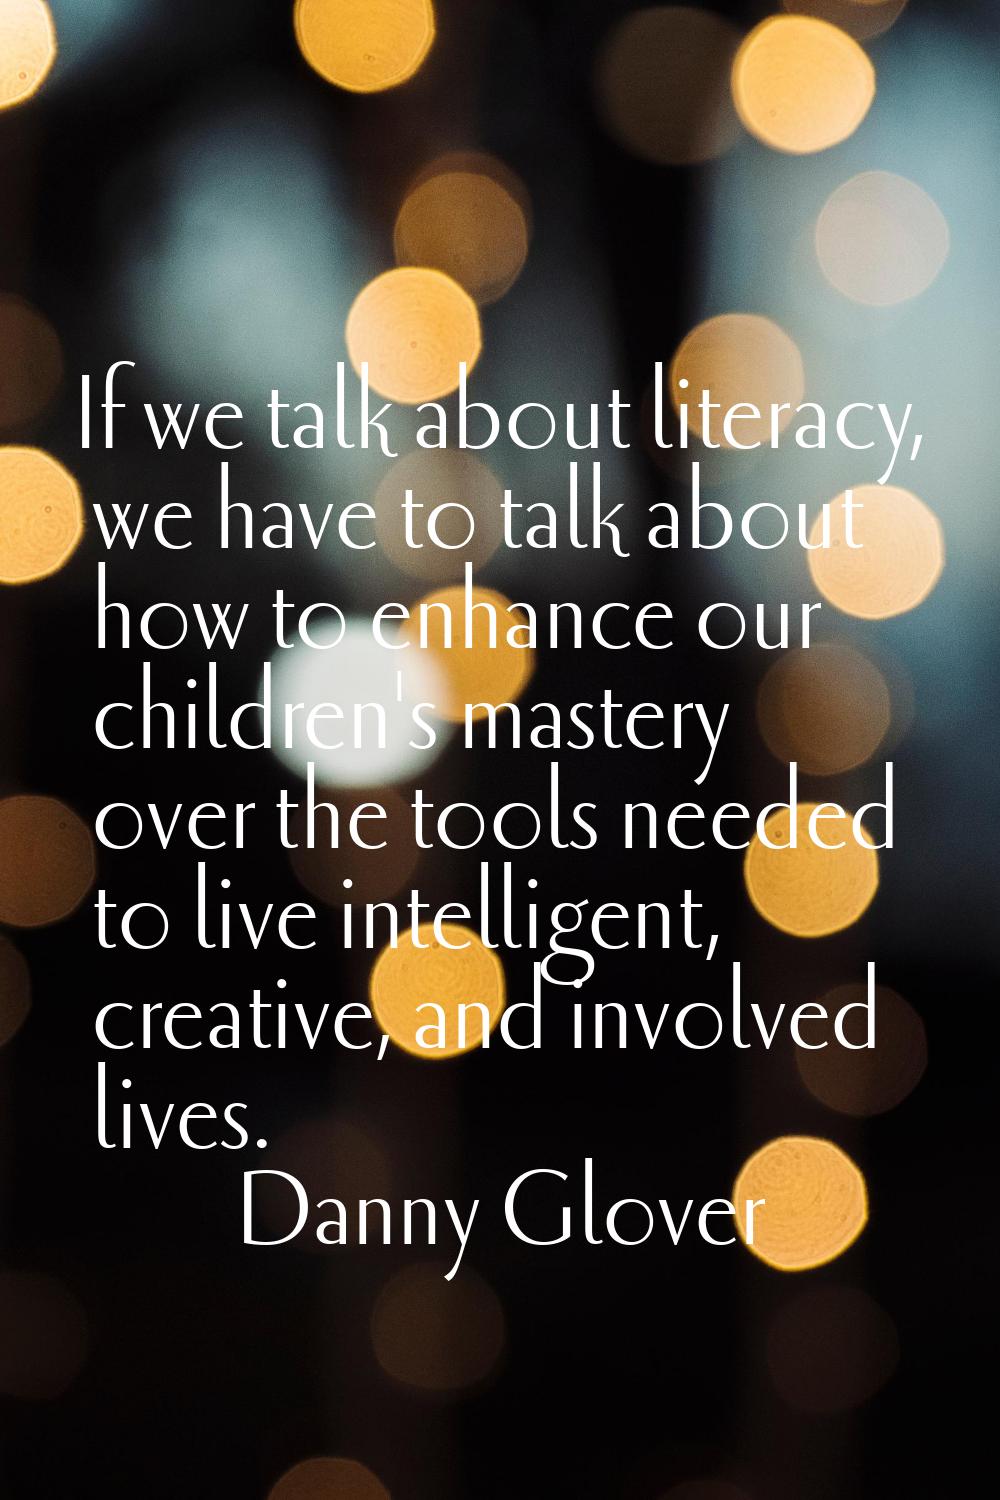 If we talk about literacy, we have to talk about how to enhance our children's mastery over the too